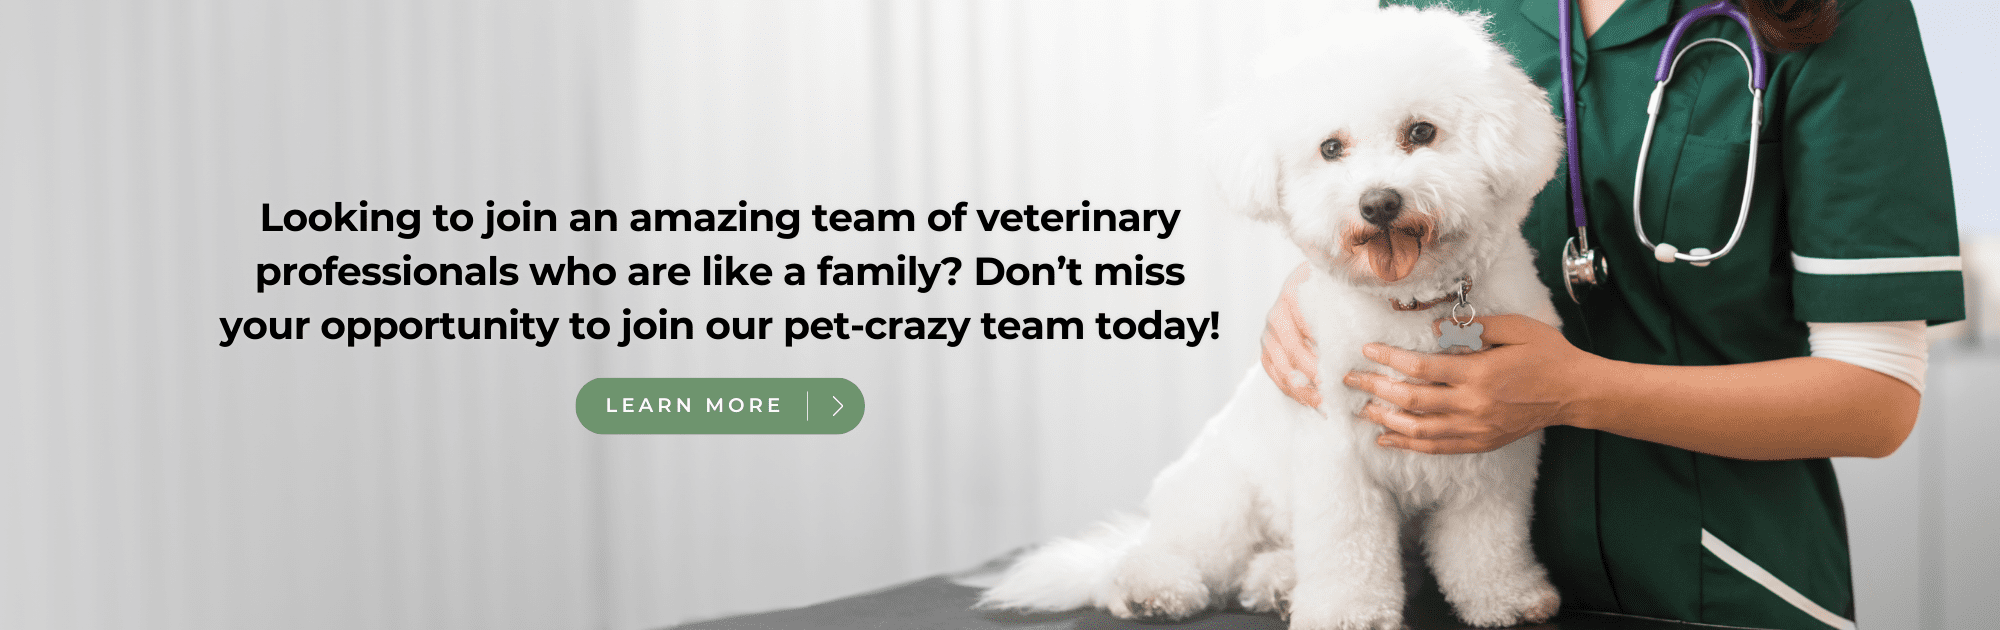 Looking to join an amazing team of veterinary professionals who are like a family? Don’t miss your opportunity to join our pet-crazy team today!